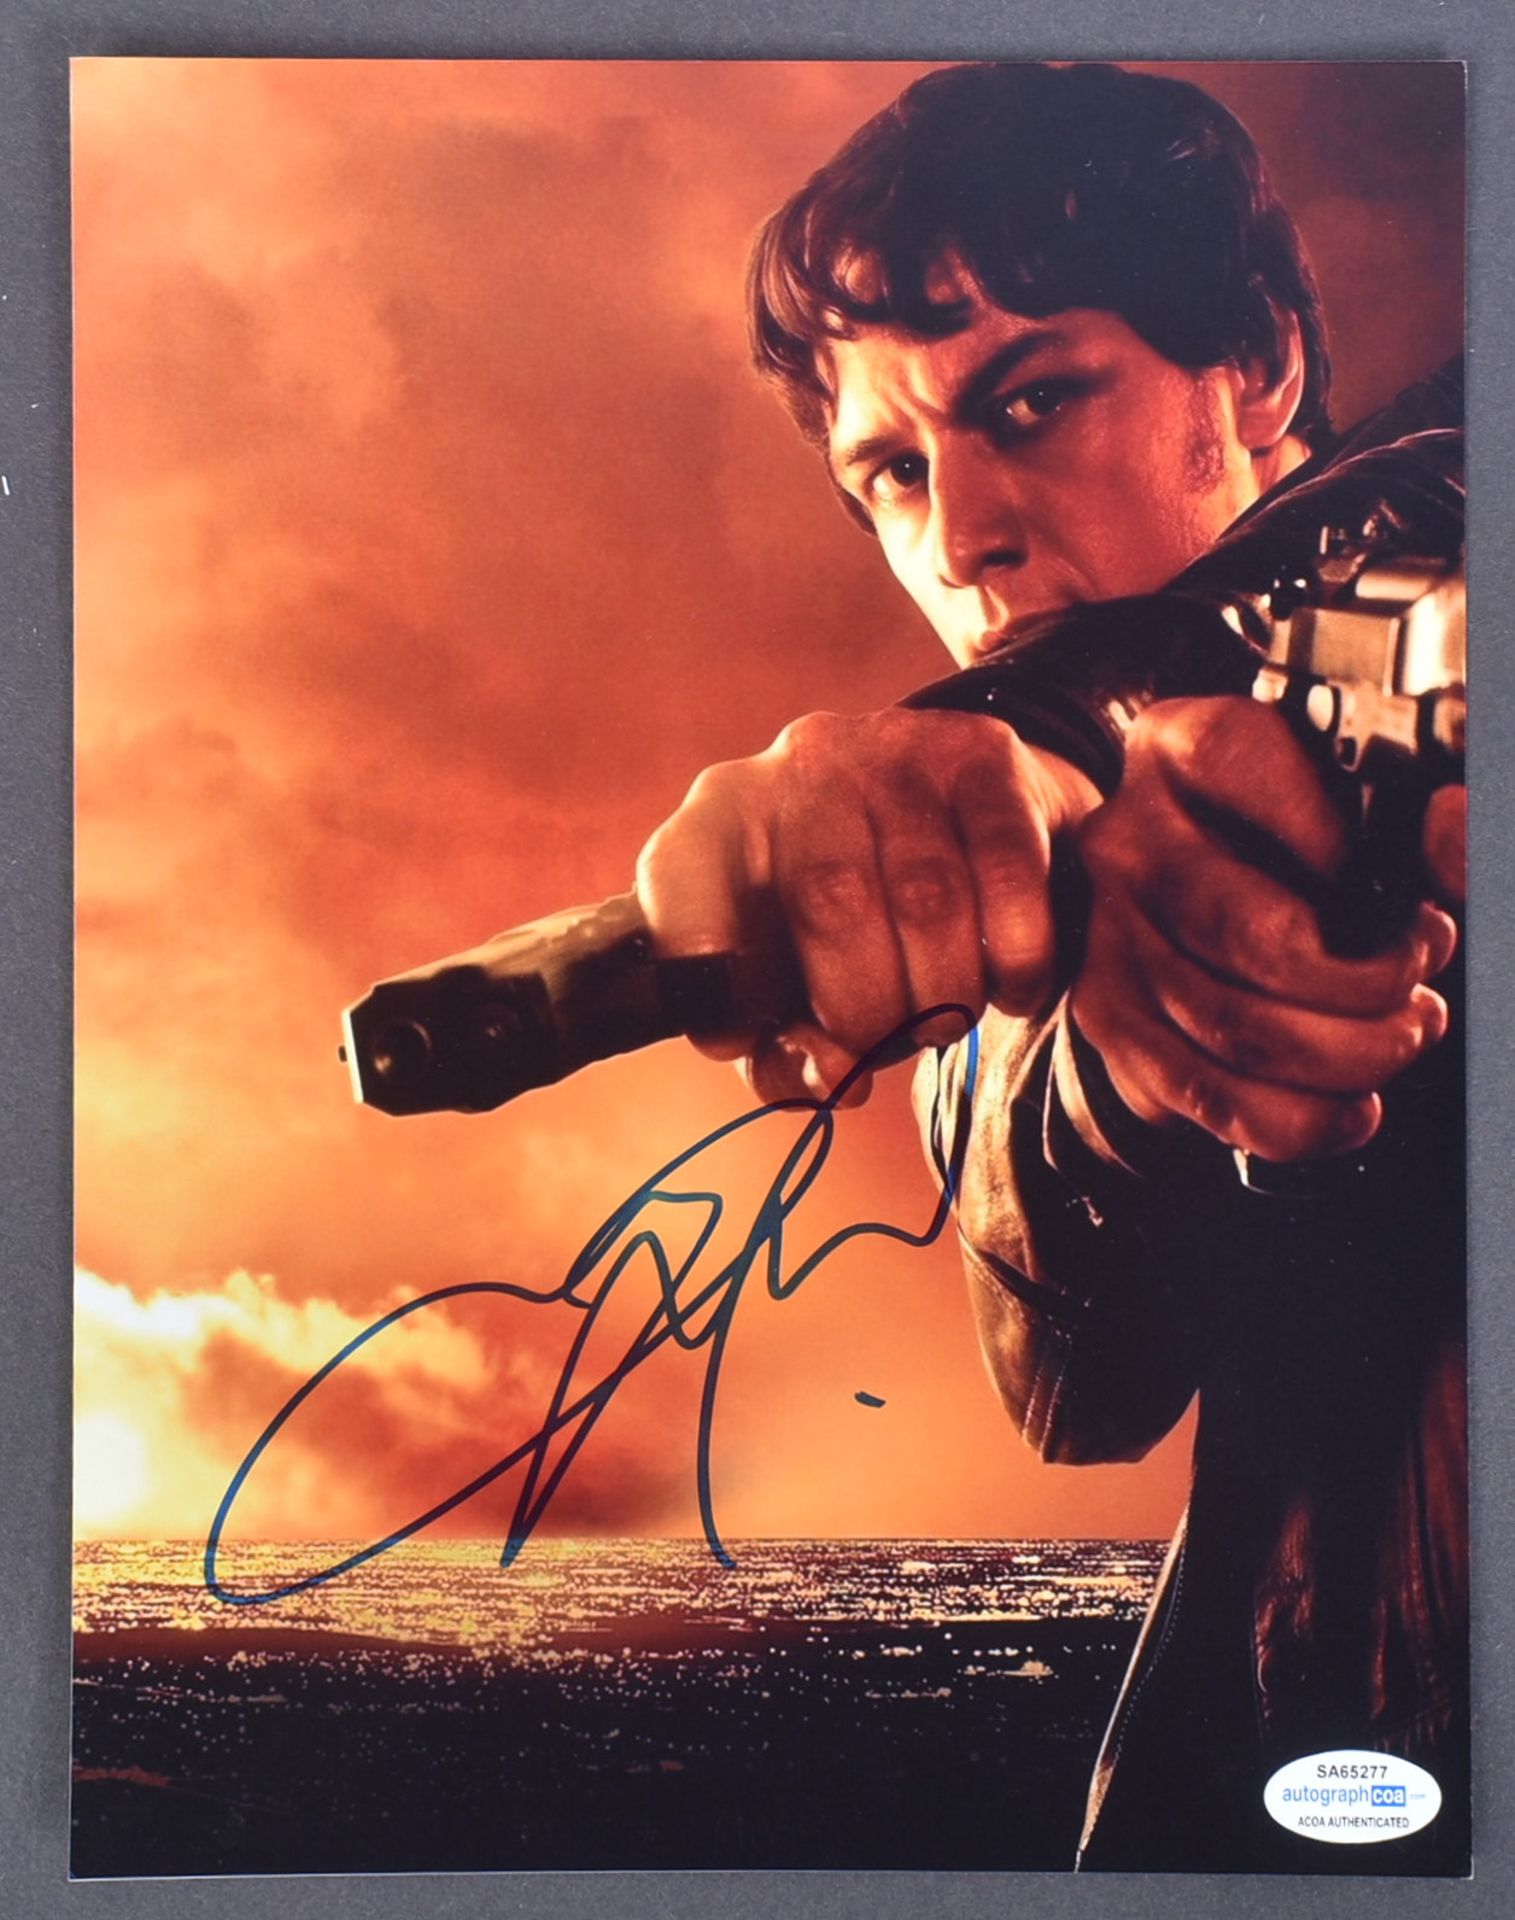 JAMES MCAVOY - WANTED - AUTOGRAPHED 8X10" PHOTO - ACOA